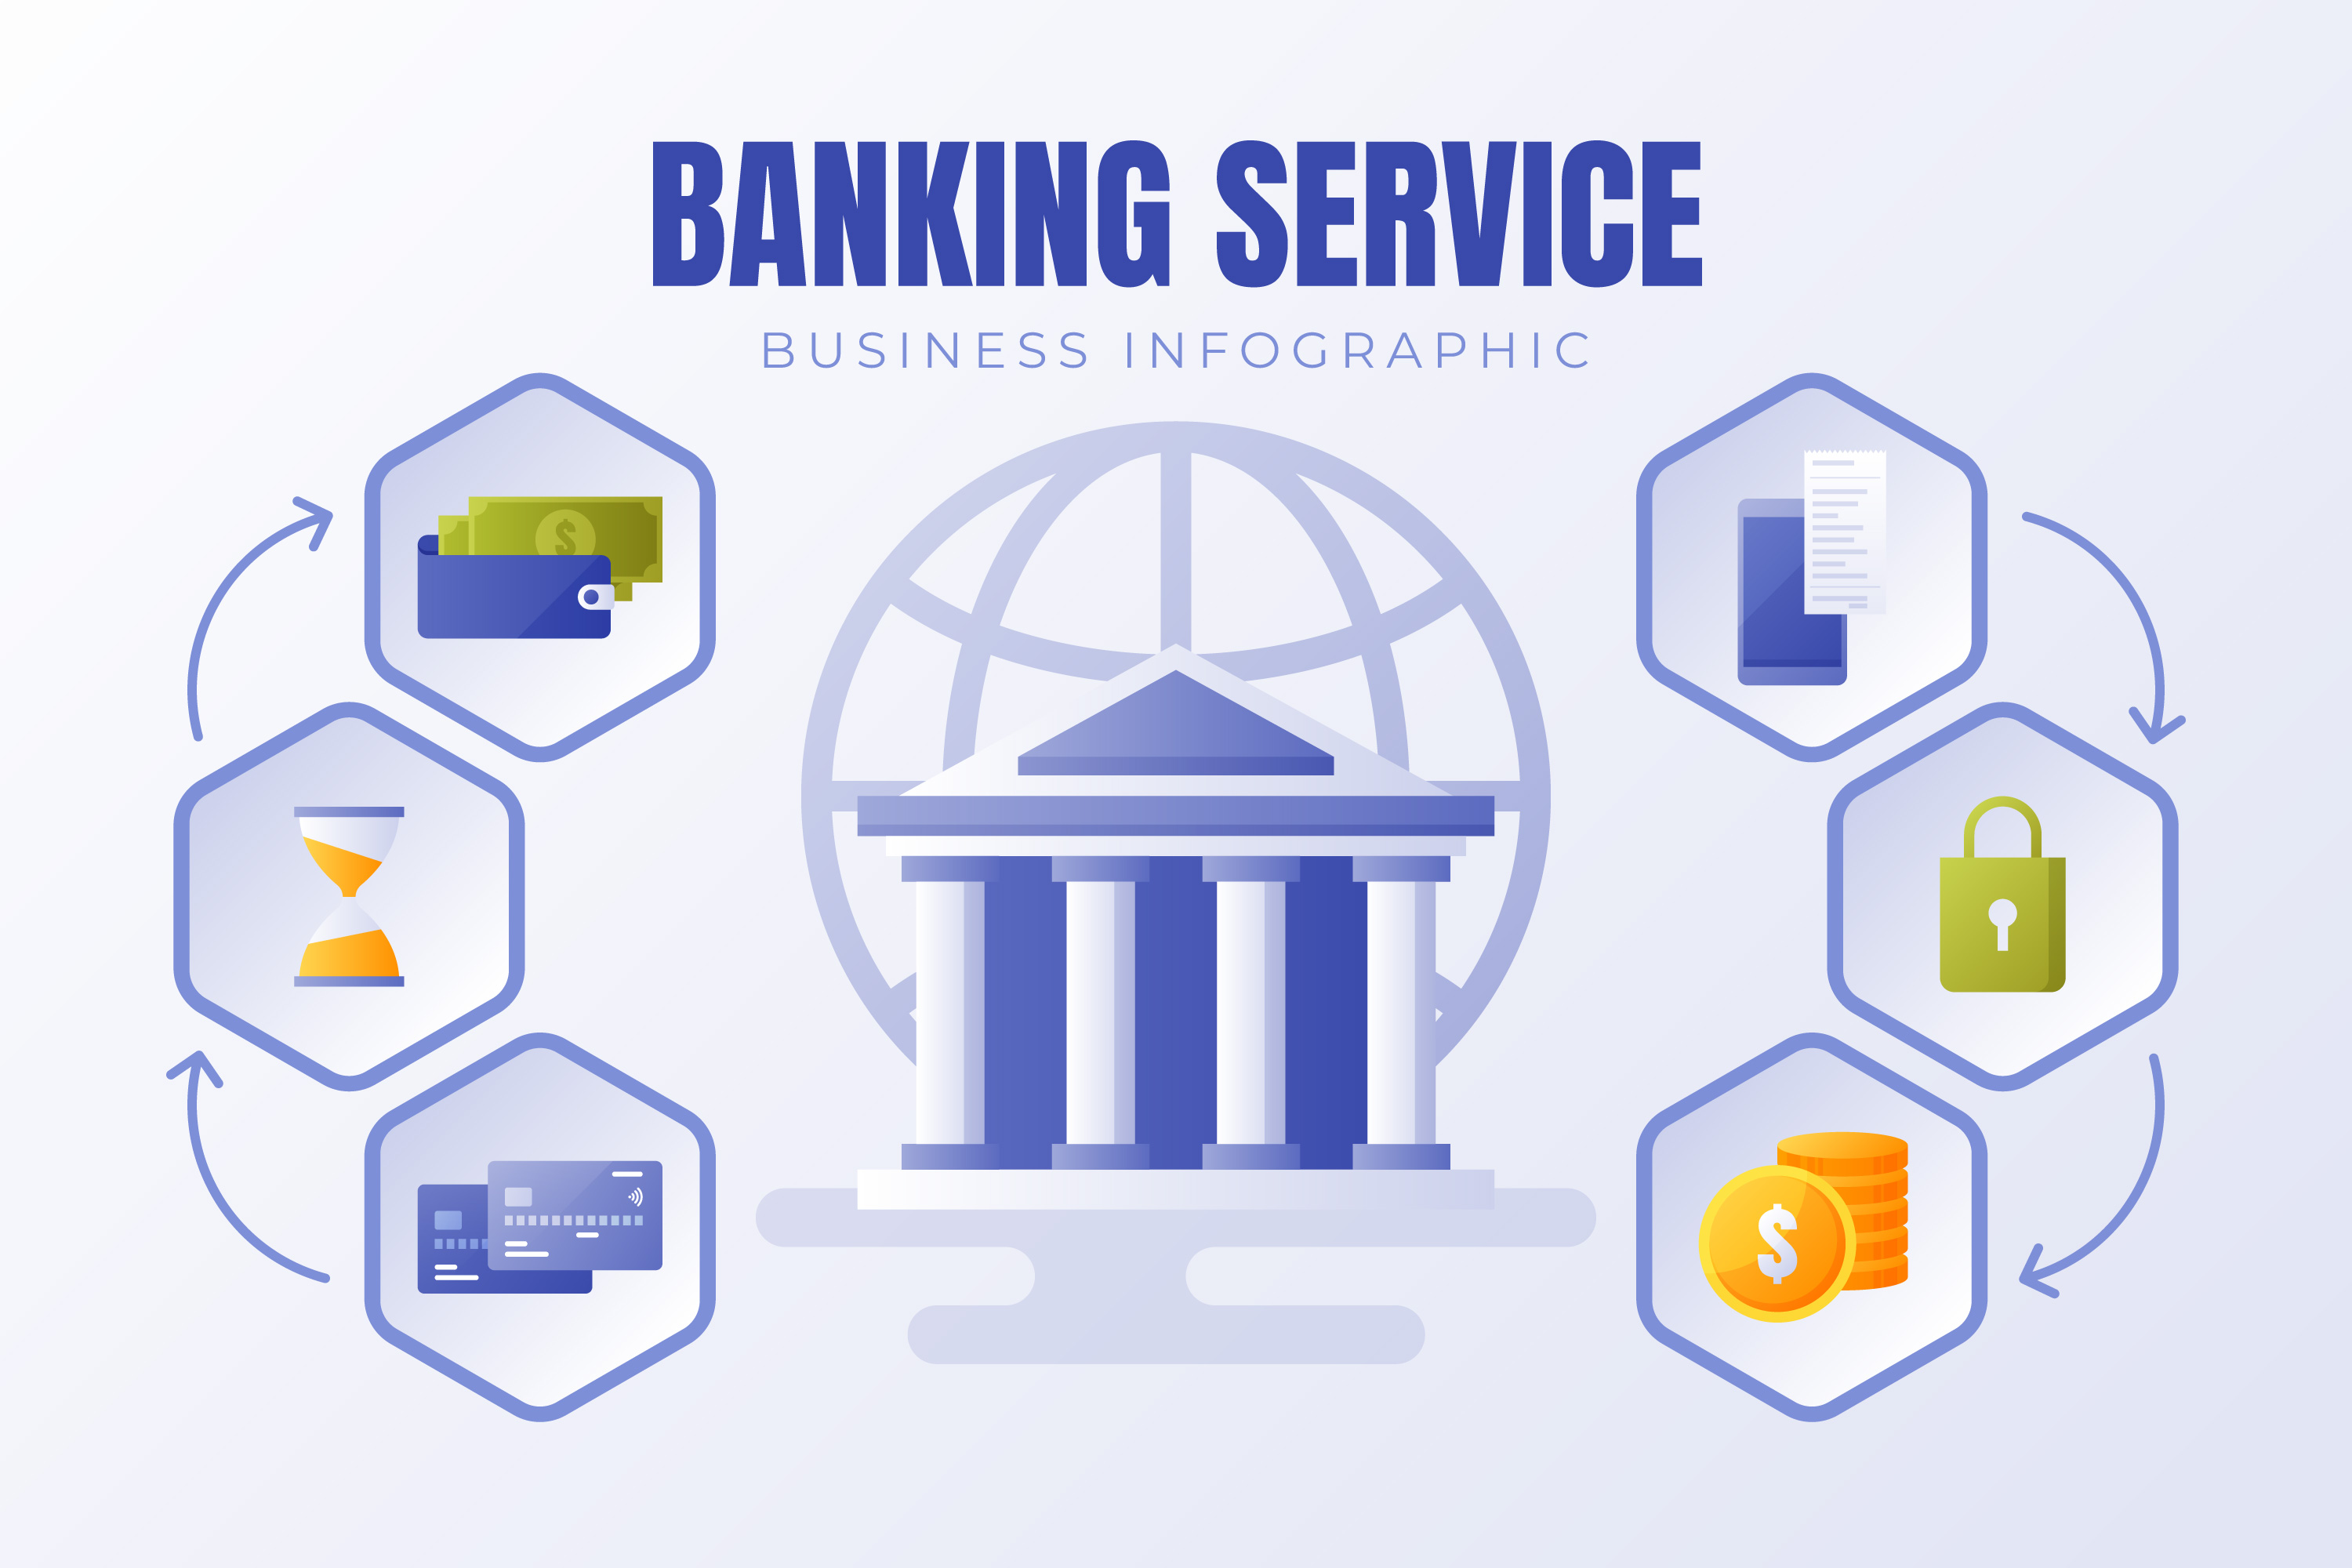 The illustration depicts infographic explaining  banking as a service